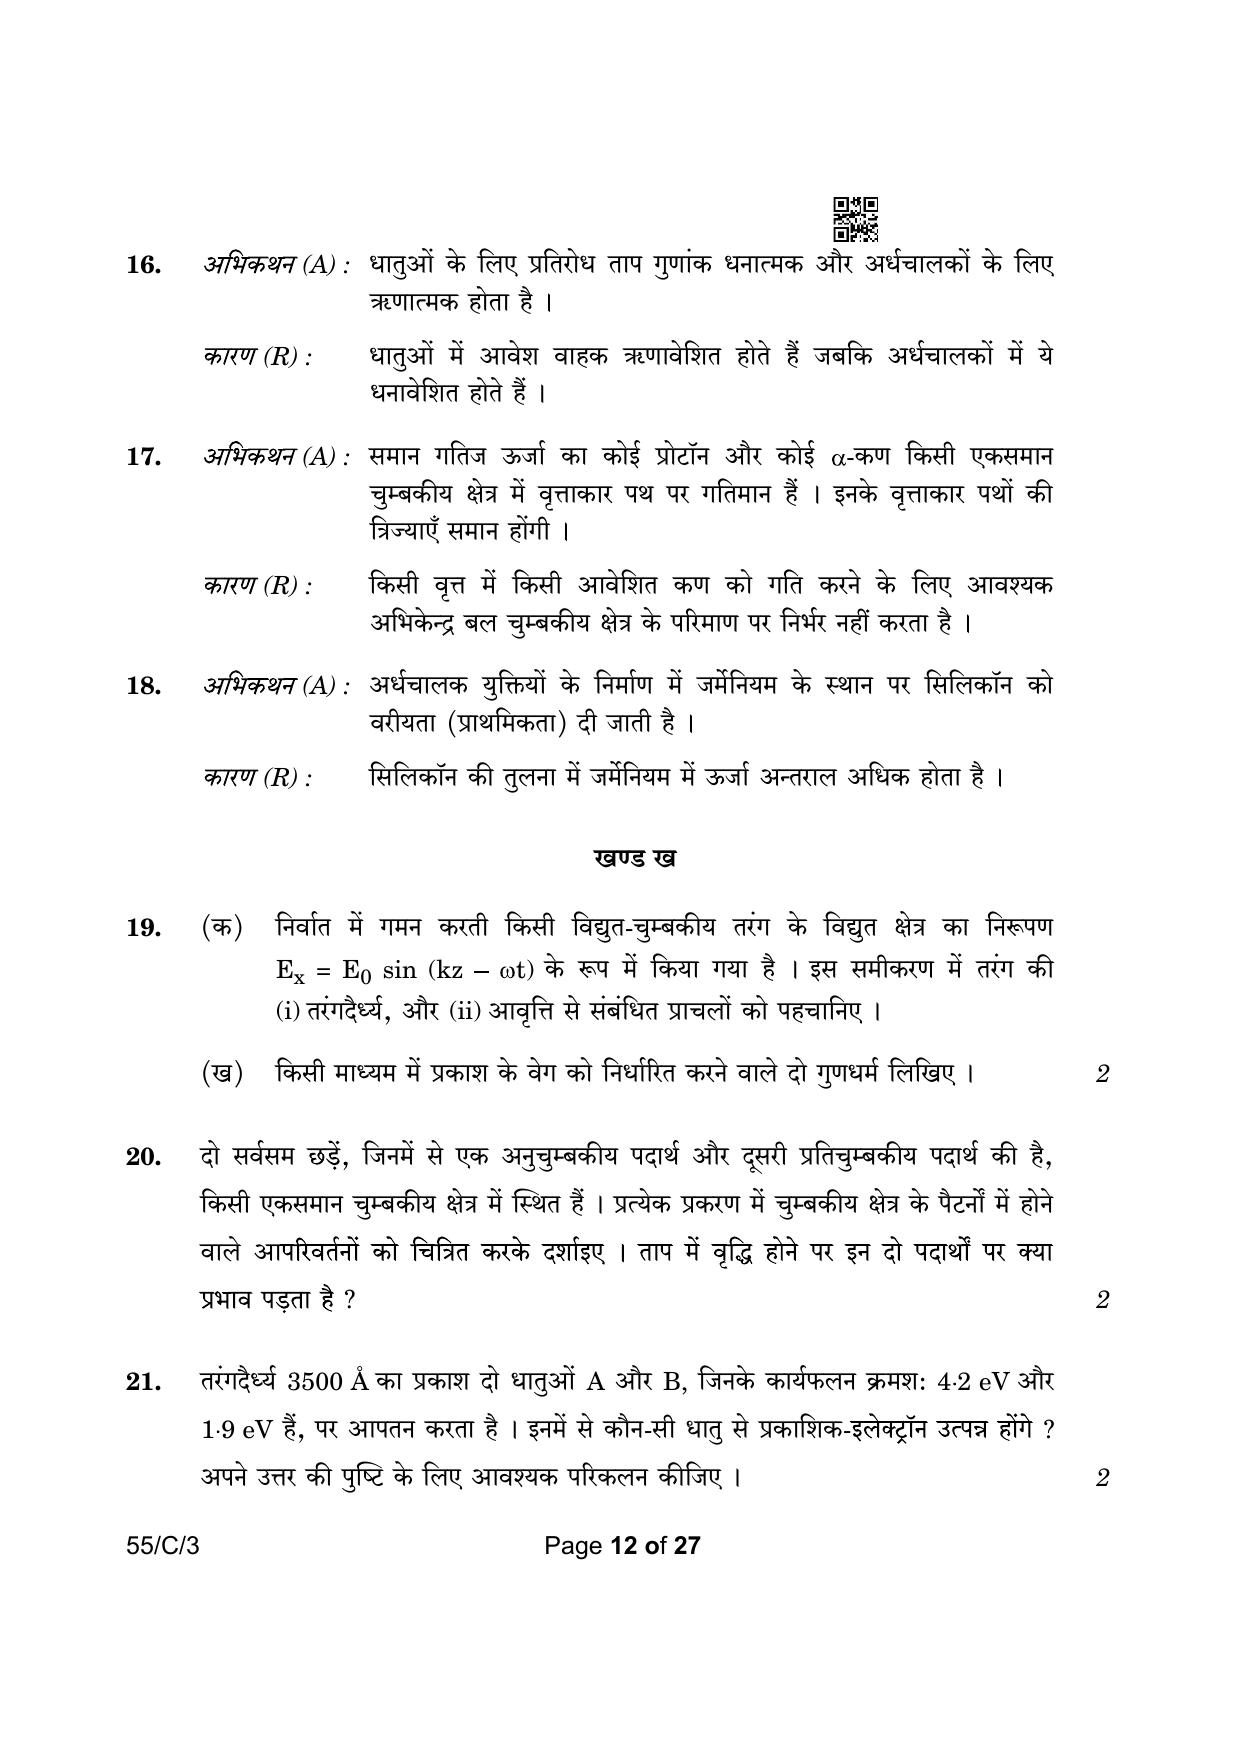 CBSE Class 12 55-3 Physics 2023 (Compartment) Question Paper - Page 12